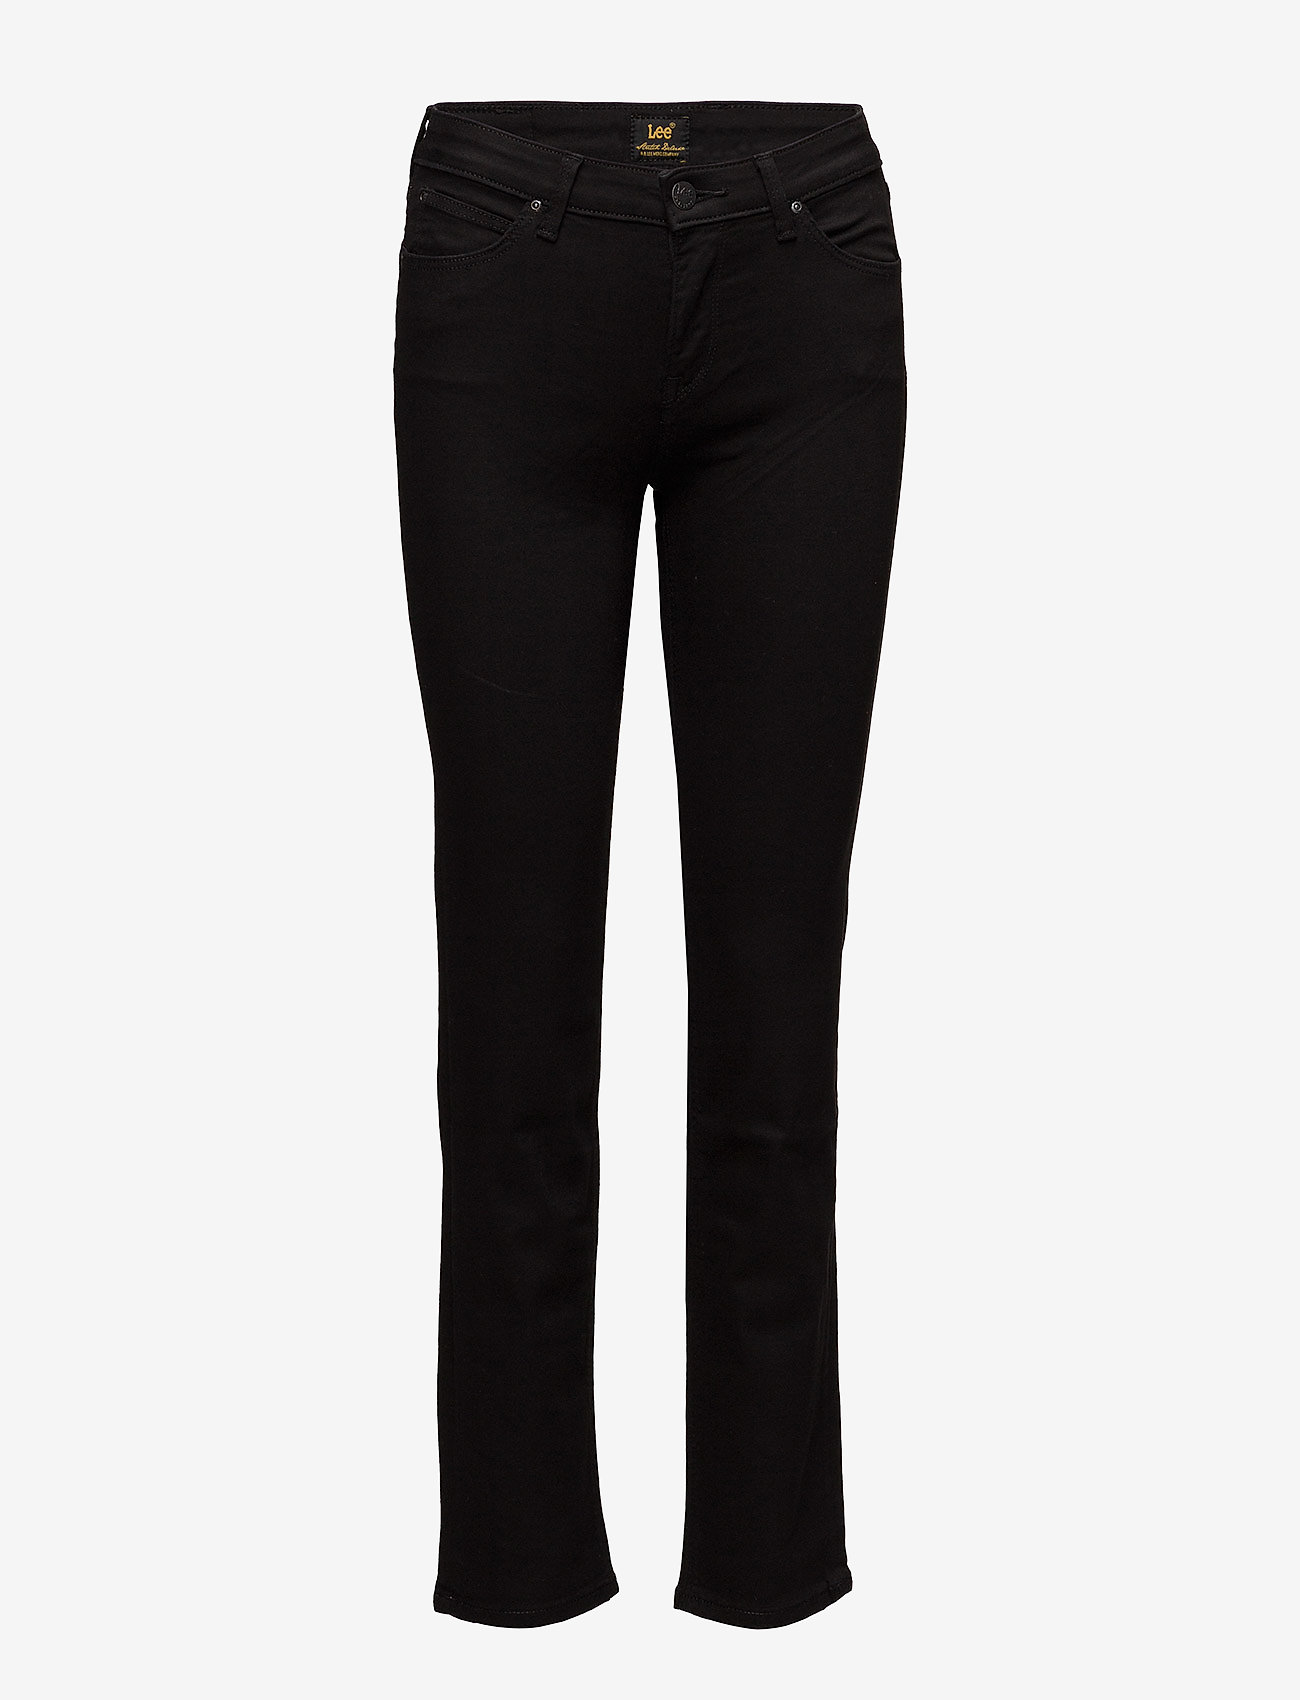 Lee Jeans - Marion Straight - straight jeans - black rinse - 0